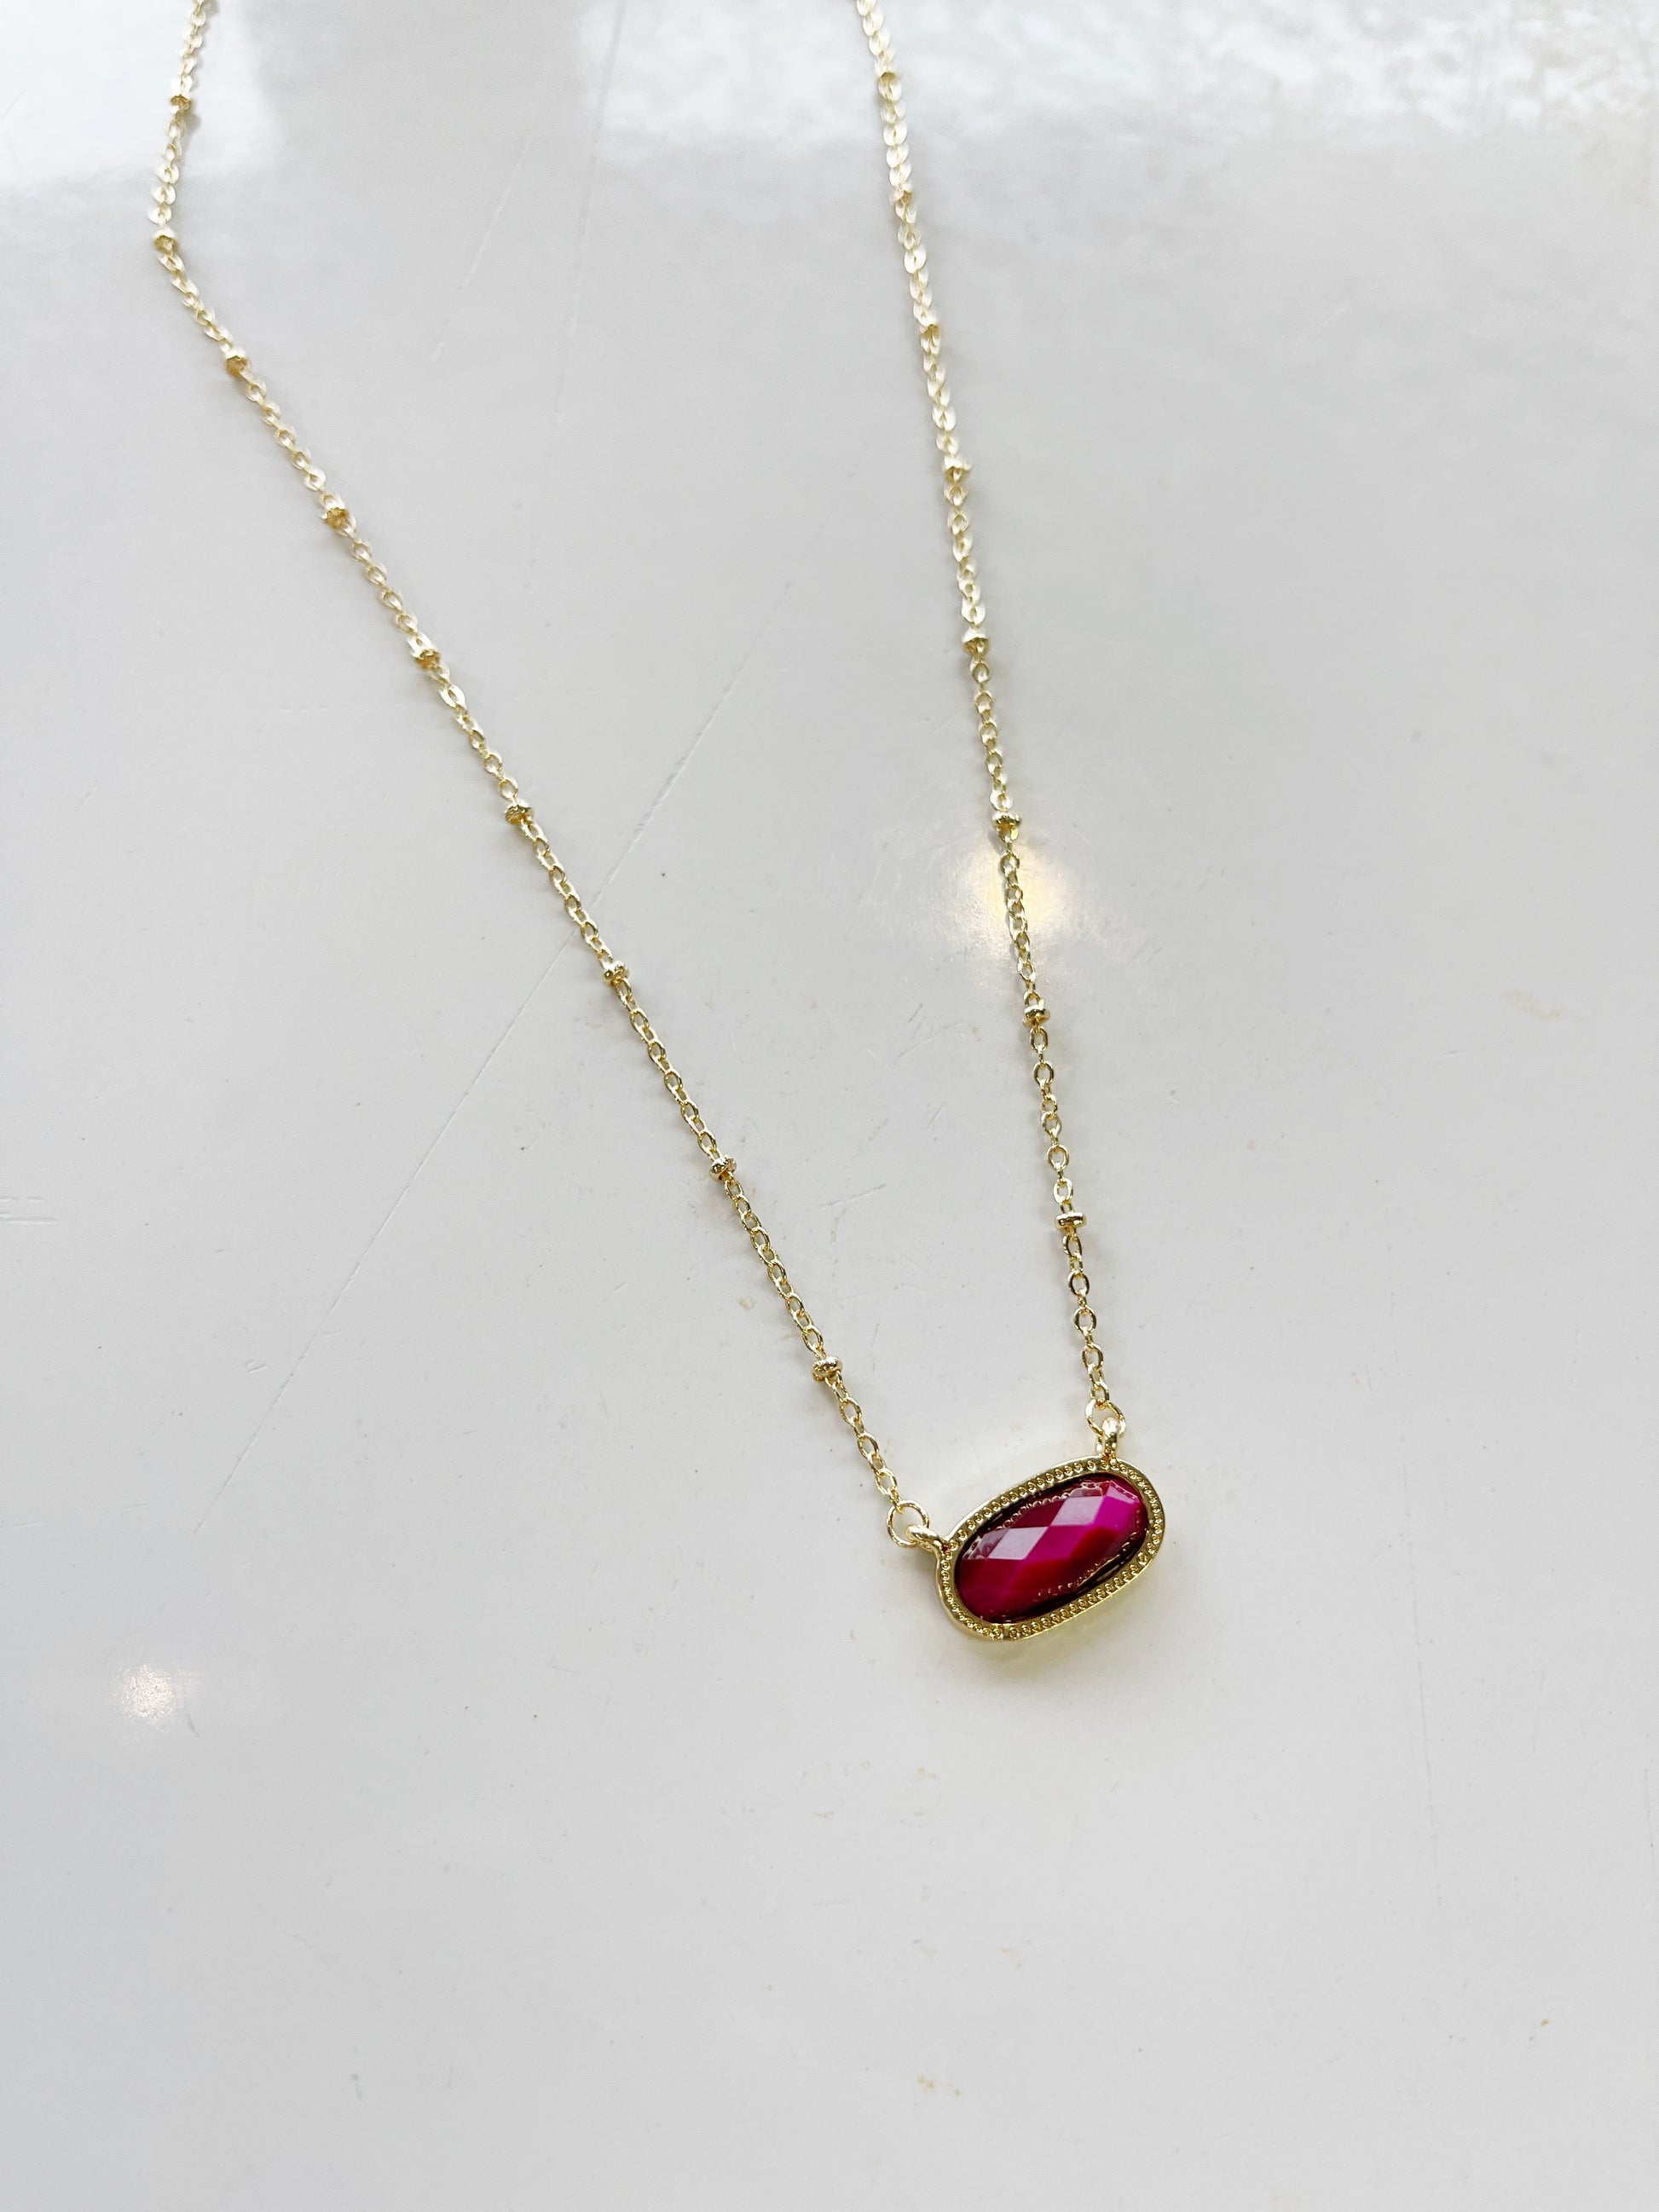 Meaningful Gemstone Necklace in Tiger Eye Fuscia  available with a Gold or Silver chain